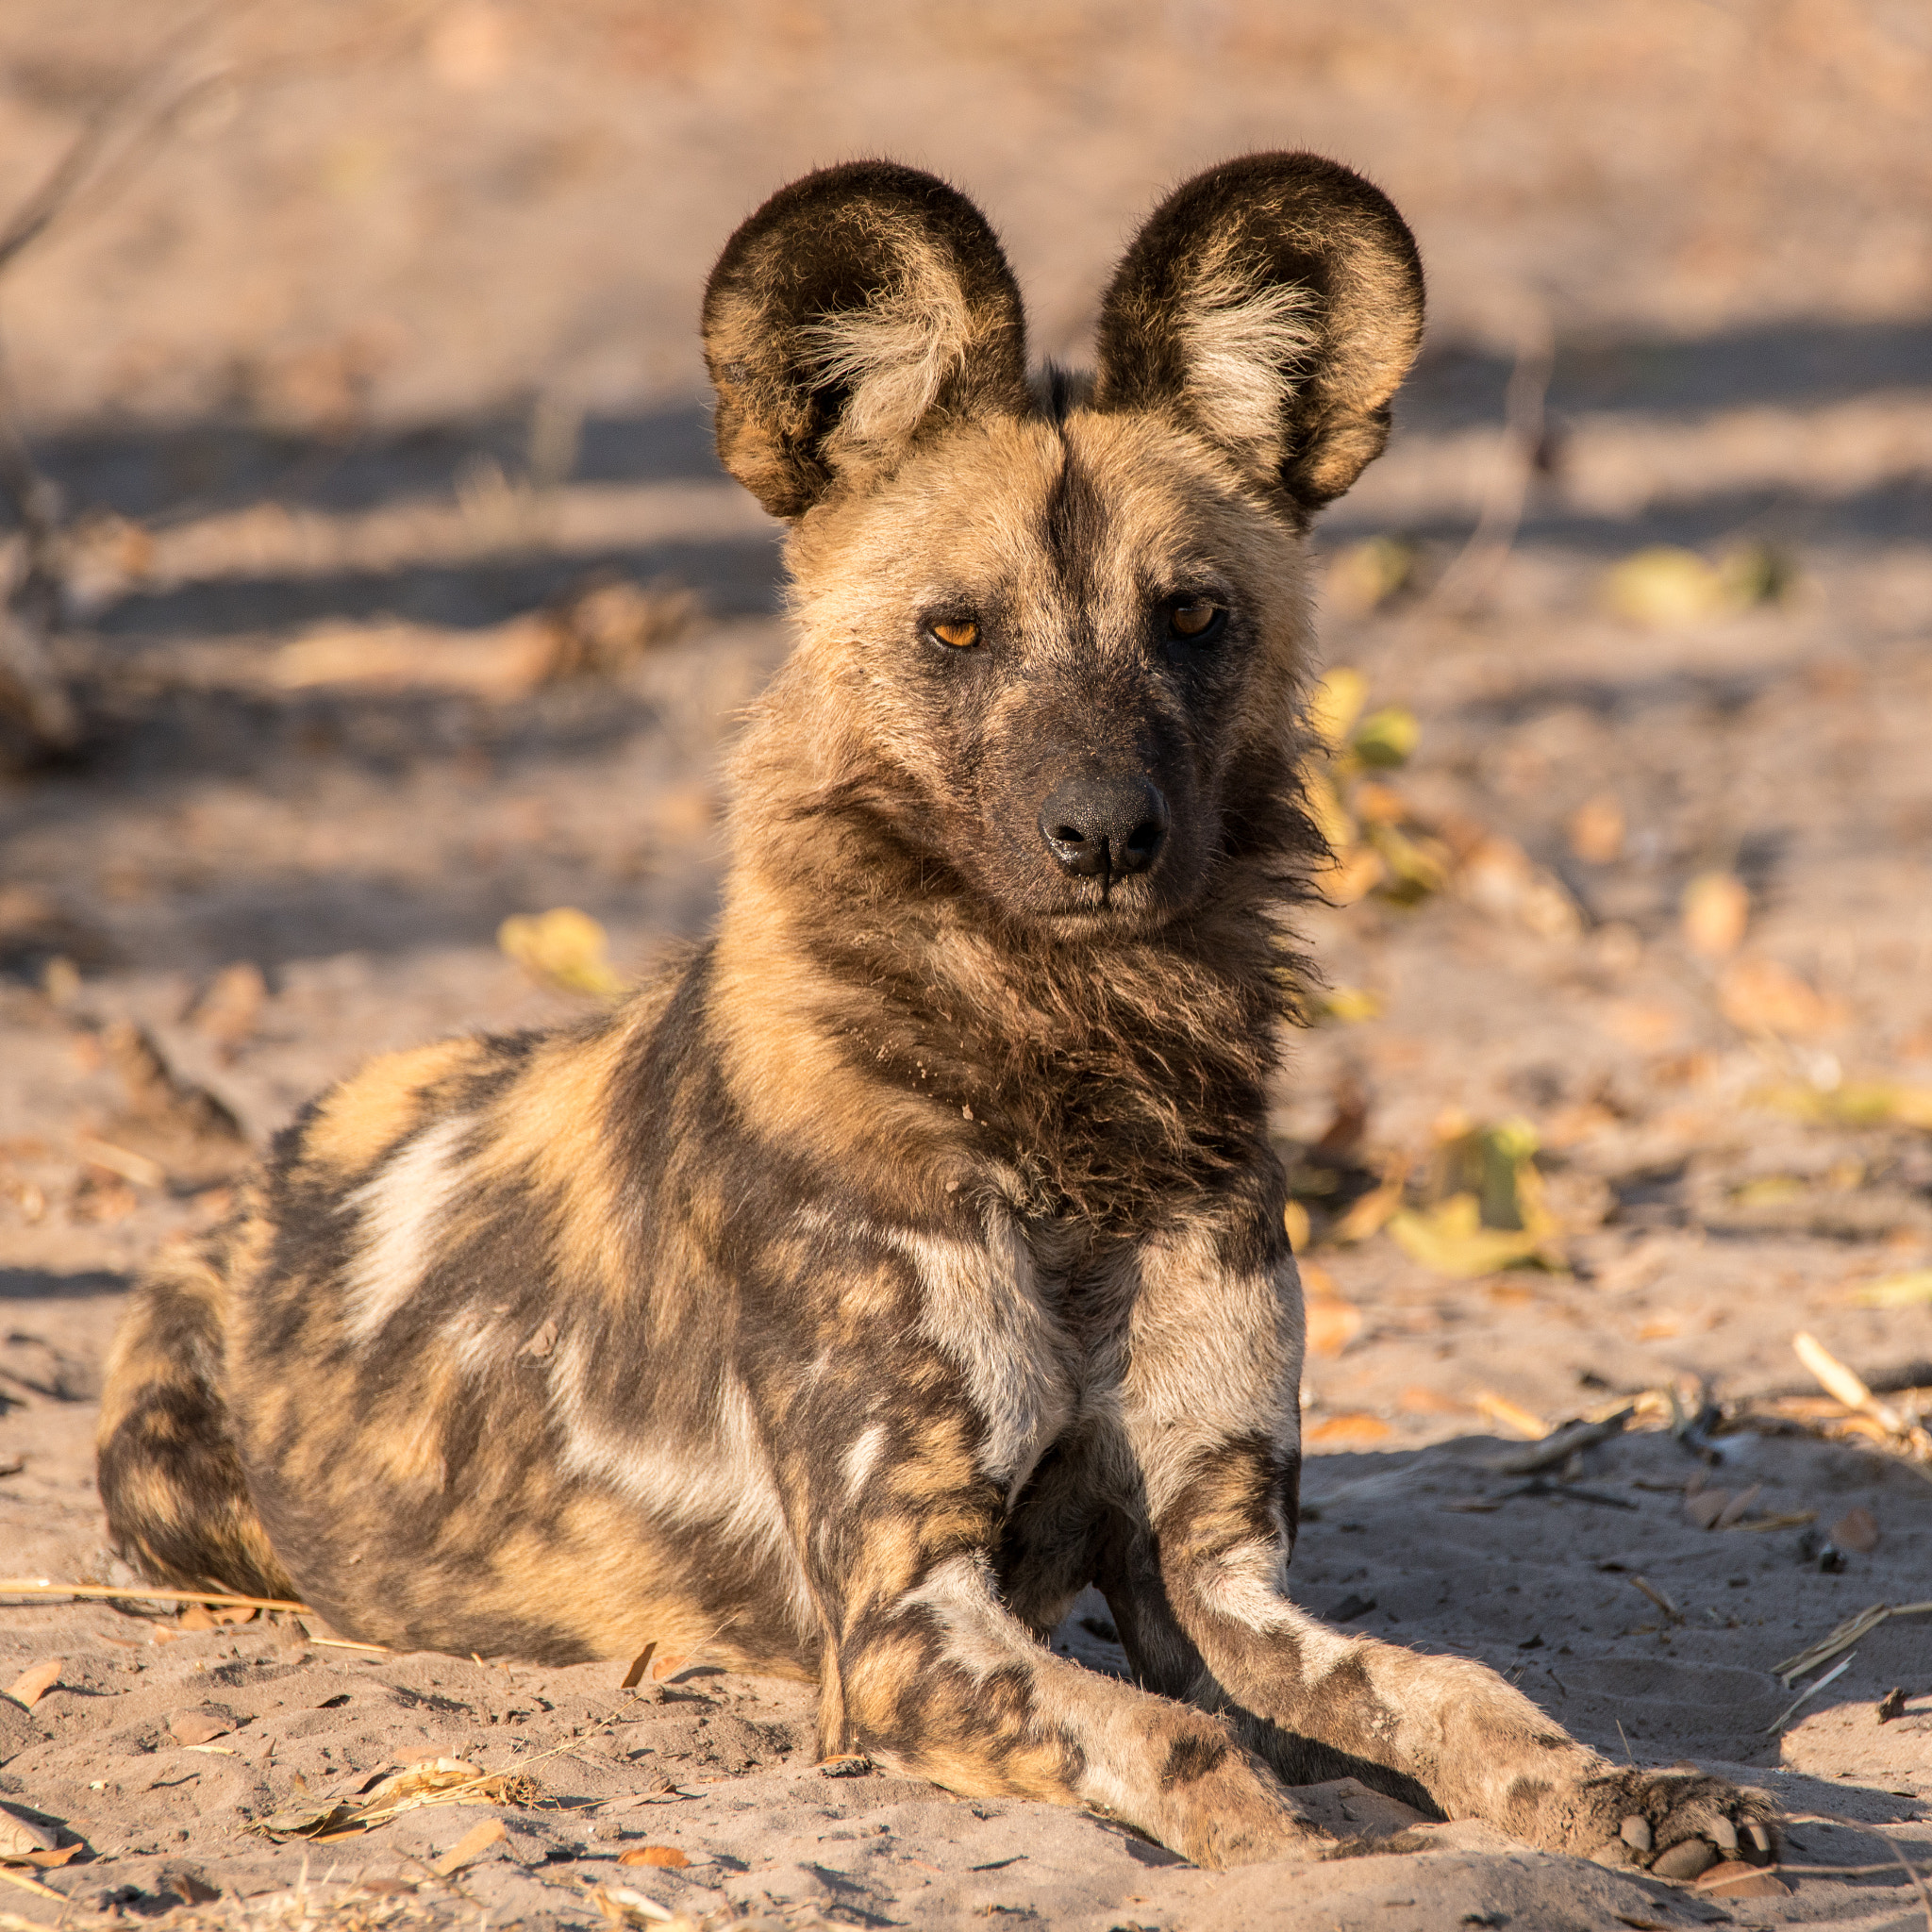 Sony a7R II + Tamron SP 150-600mm F5-6.3 Di VC USD sample photo. Wild dog in repose photography